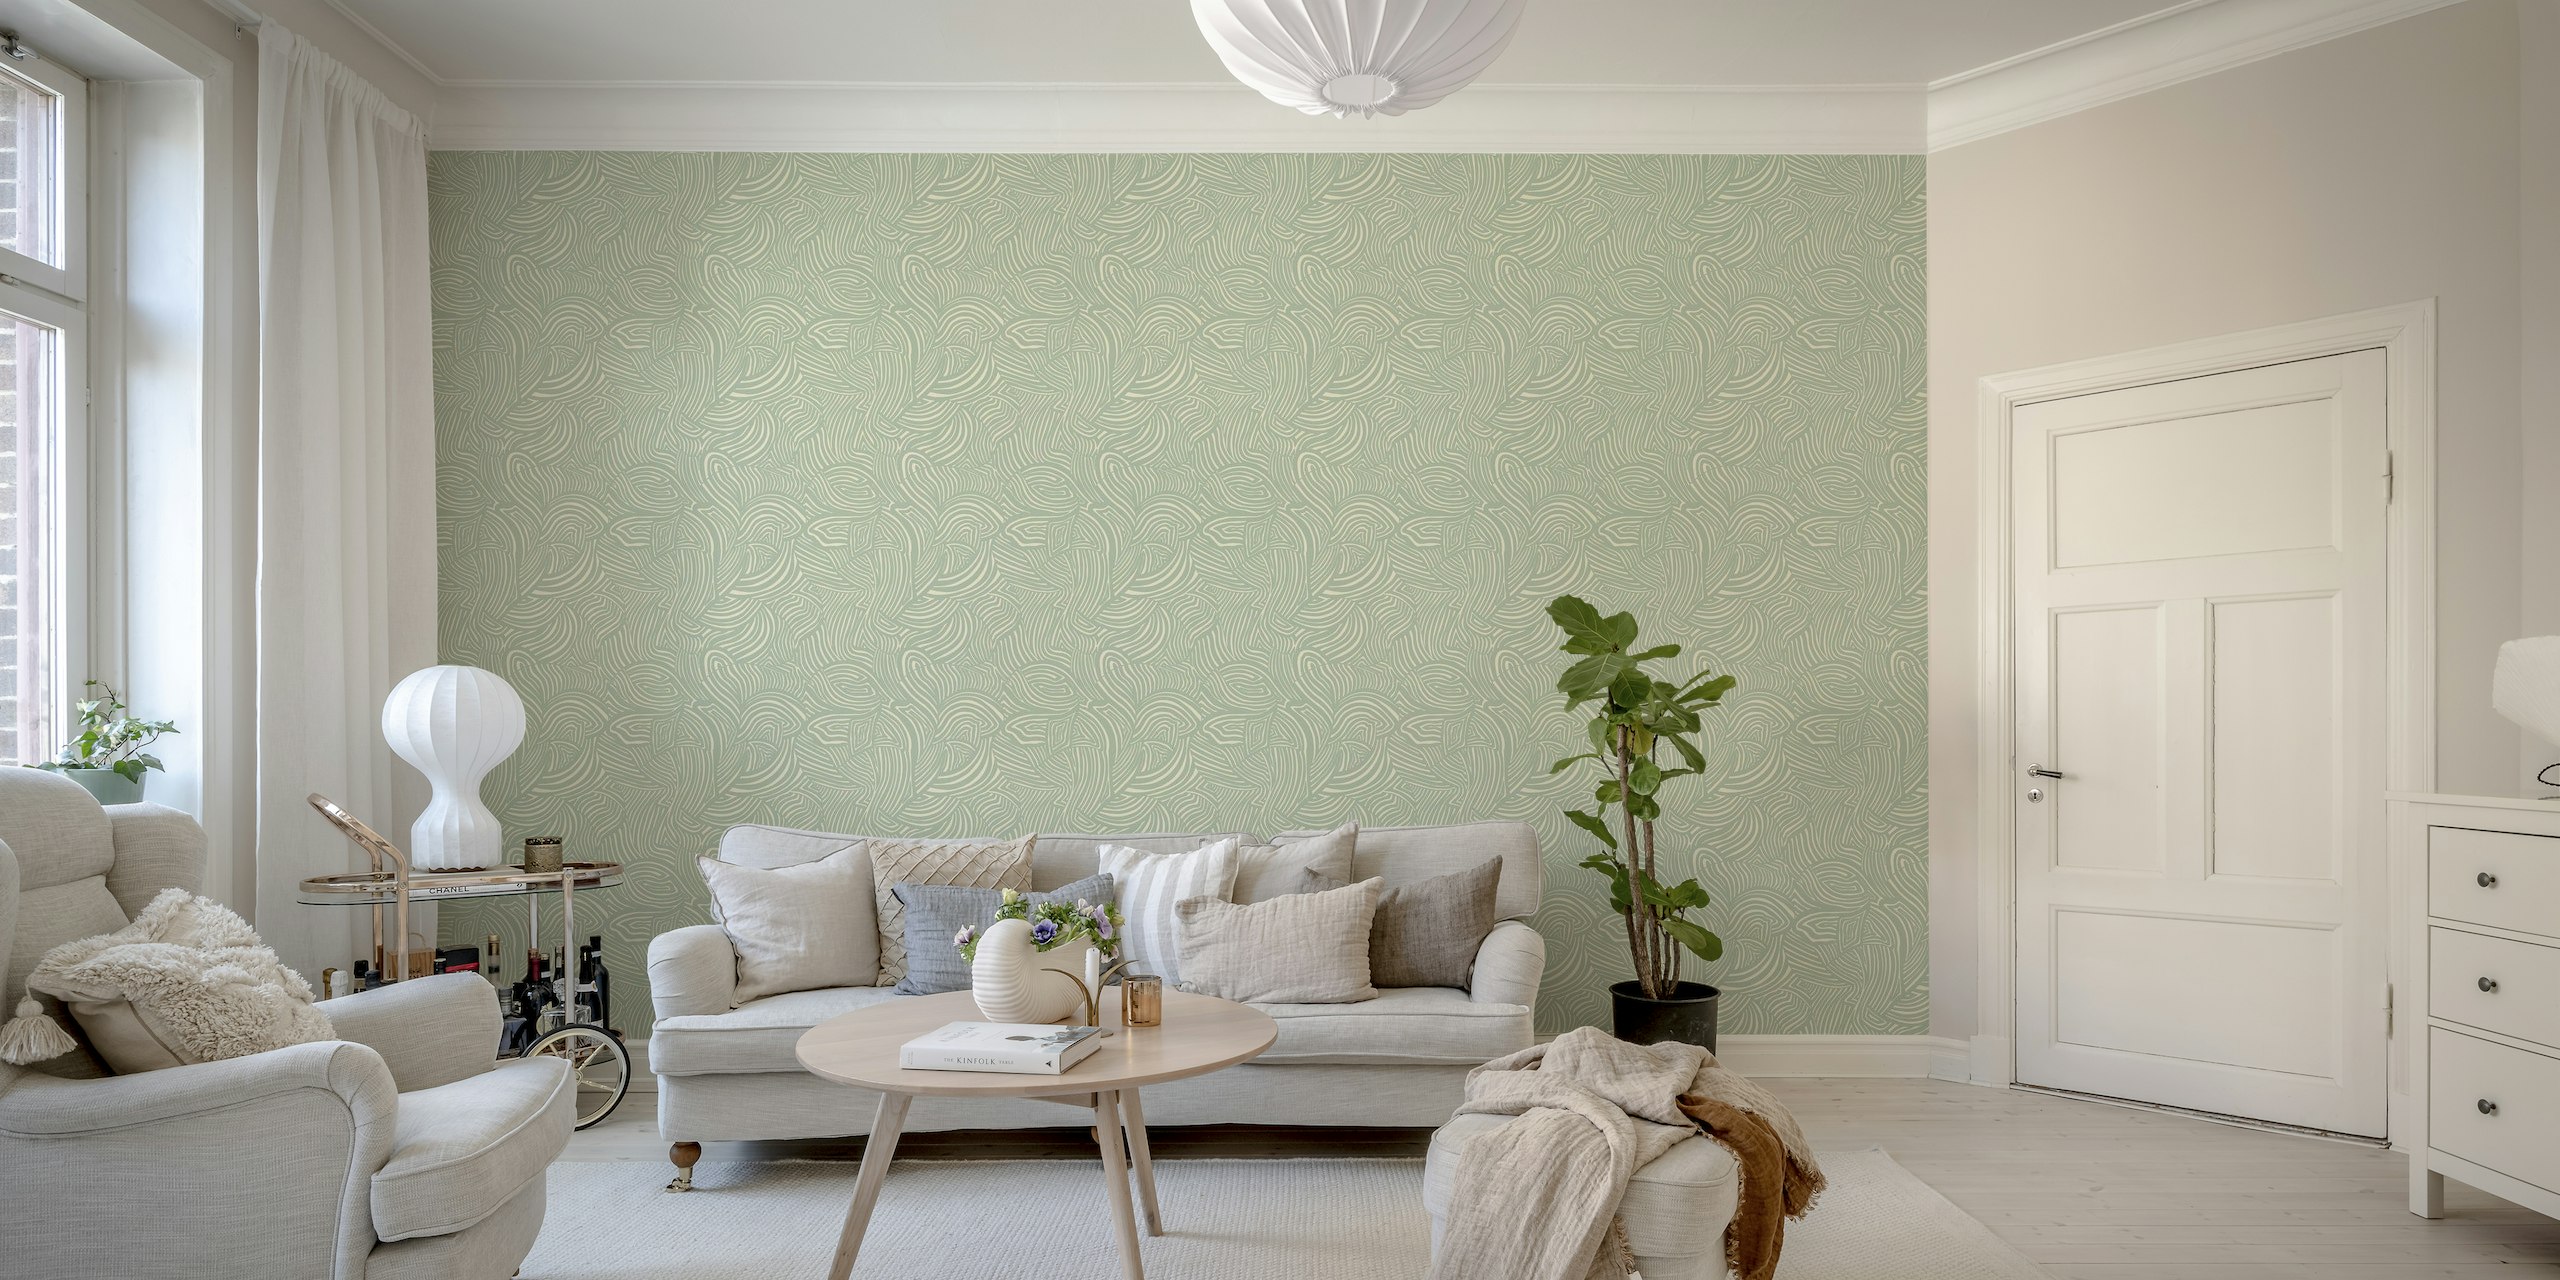 Minty Whirlwind - Abstract Cream & Green Wave wallpaper